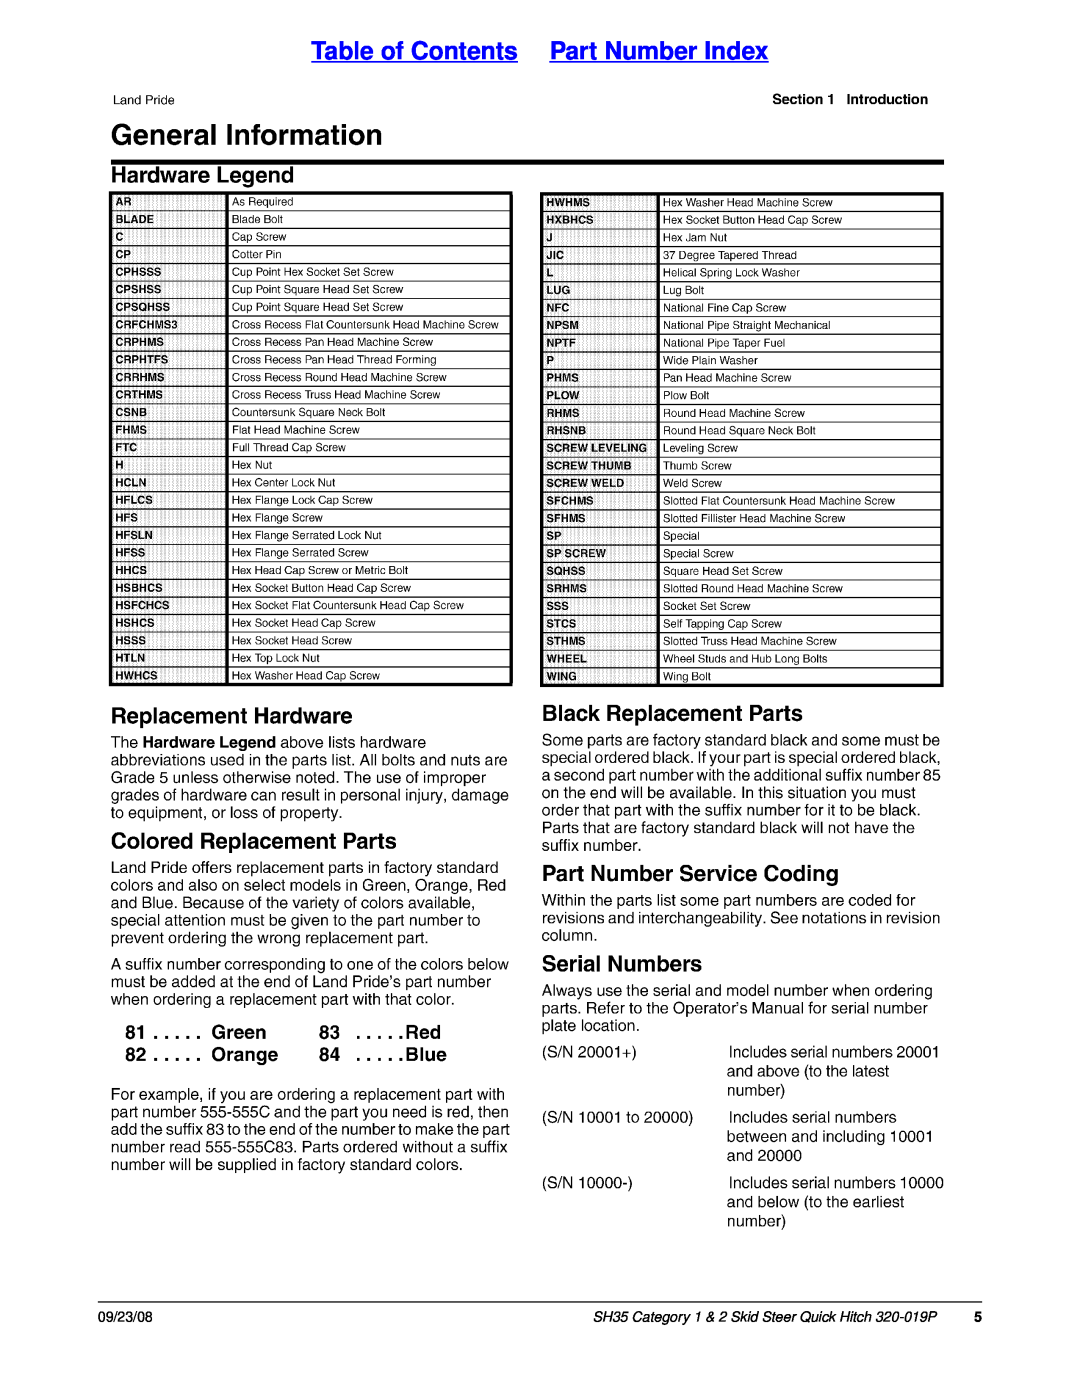 Land Pride SH35 manual Table of Contents Part Number Index, 09/23/08 